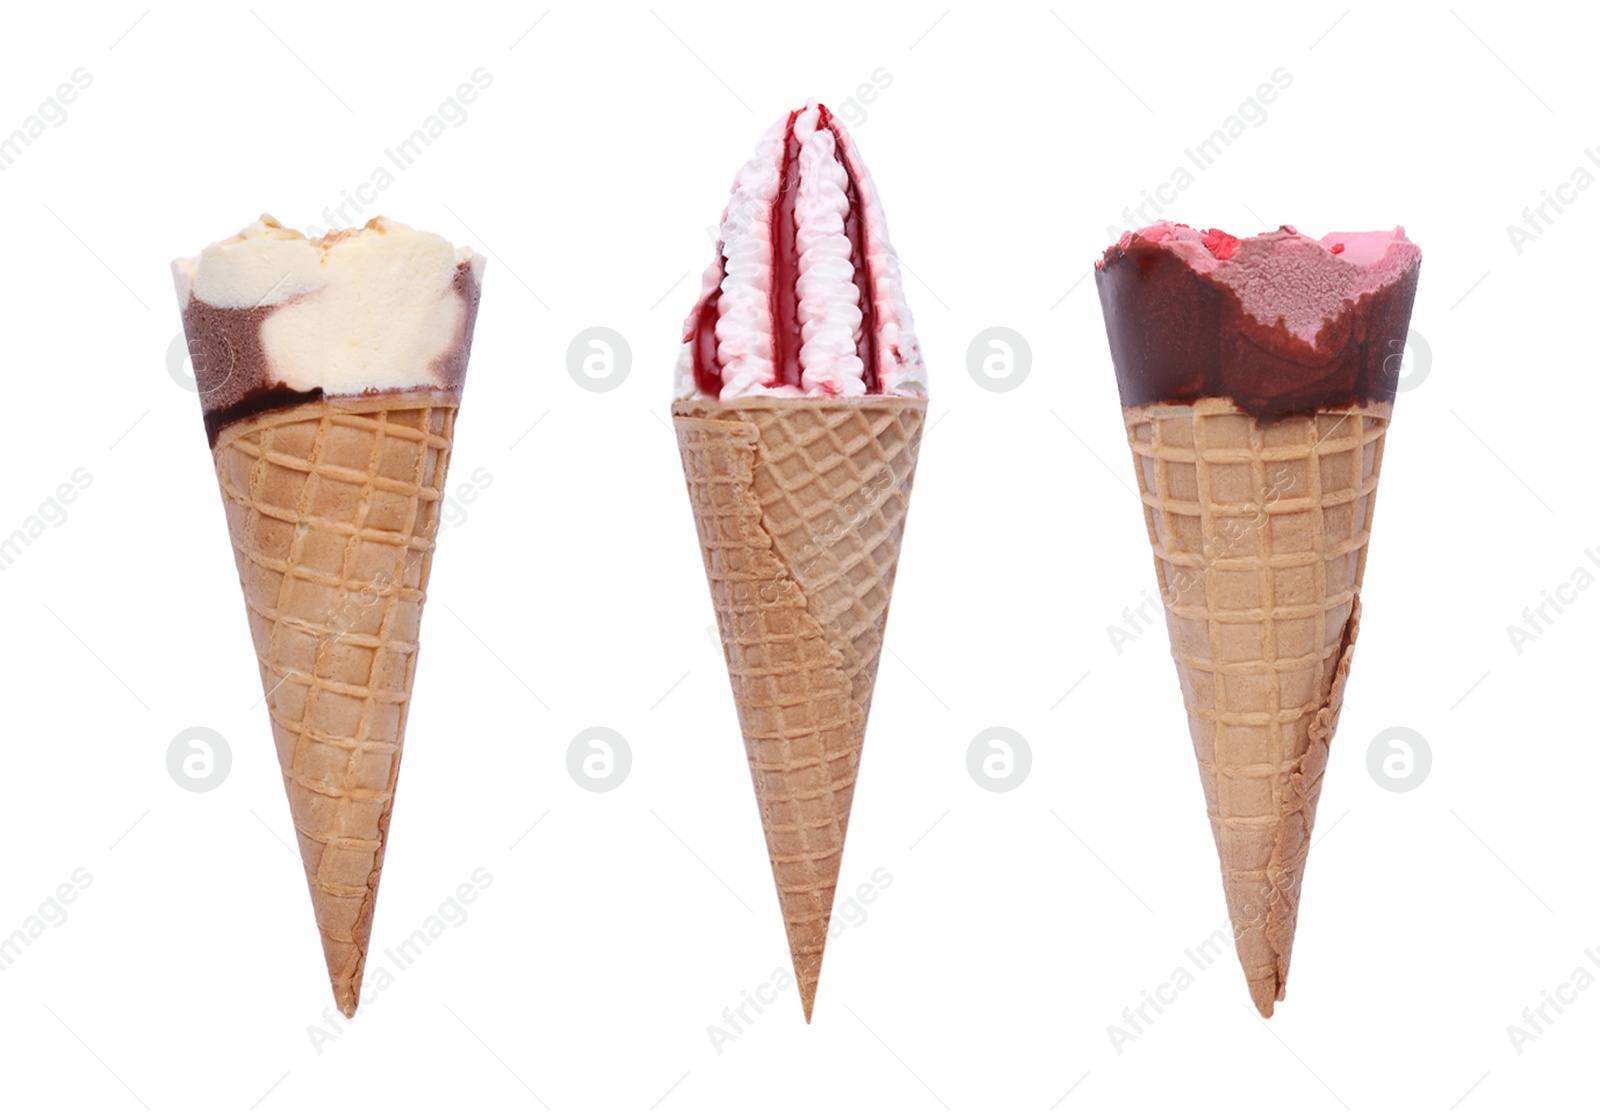 Image of Set of different ice creams in wafer cones isolated on white